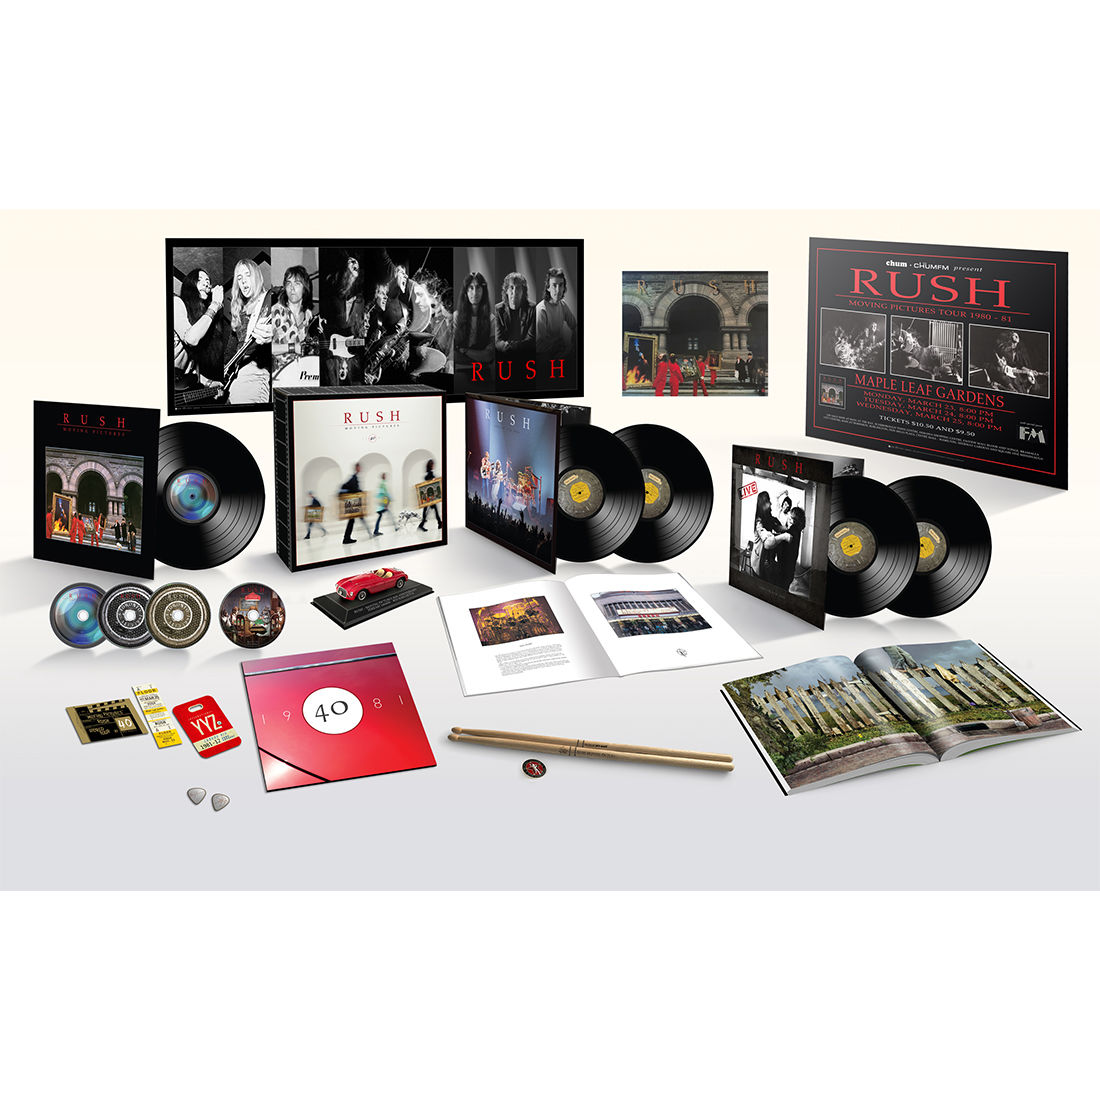 Rush - Moving Pictures (40th Anniversary): Super Deluxe Vinyl Box Set